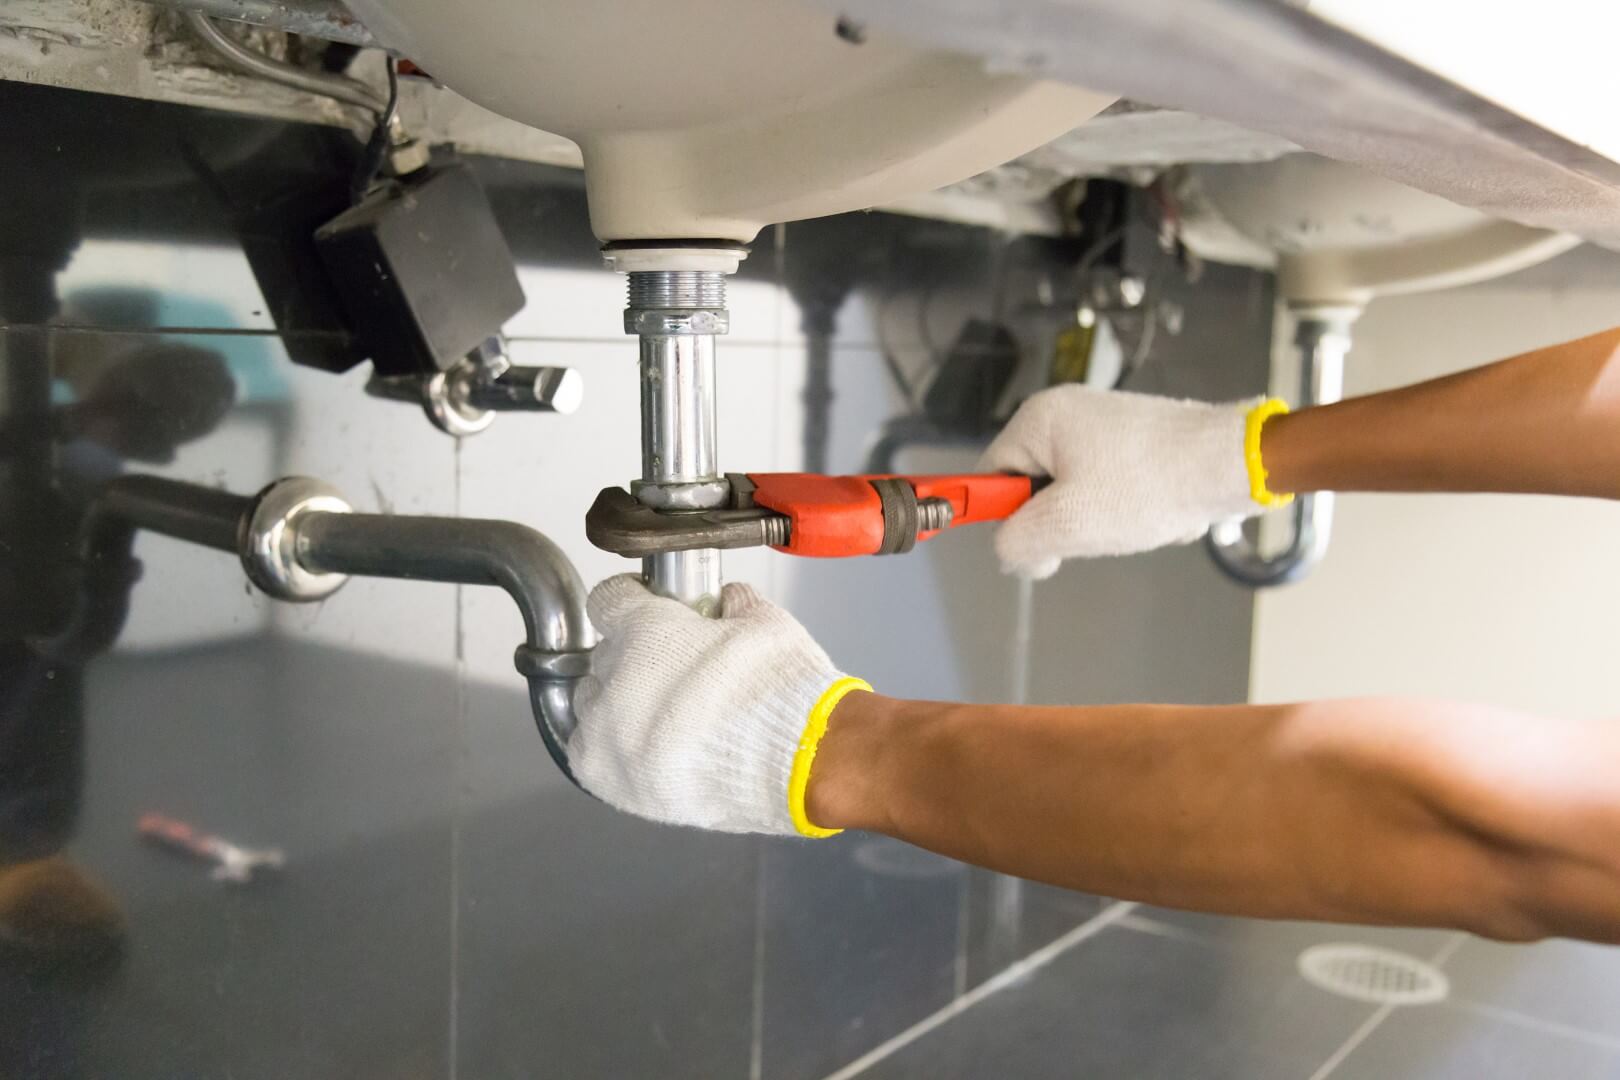 How to Pick a Top-Notch Plumbing Company